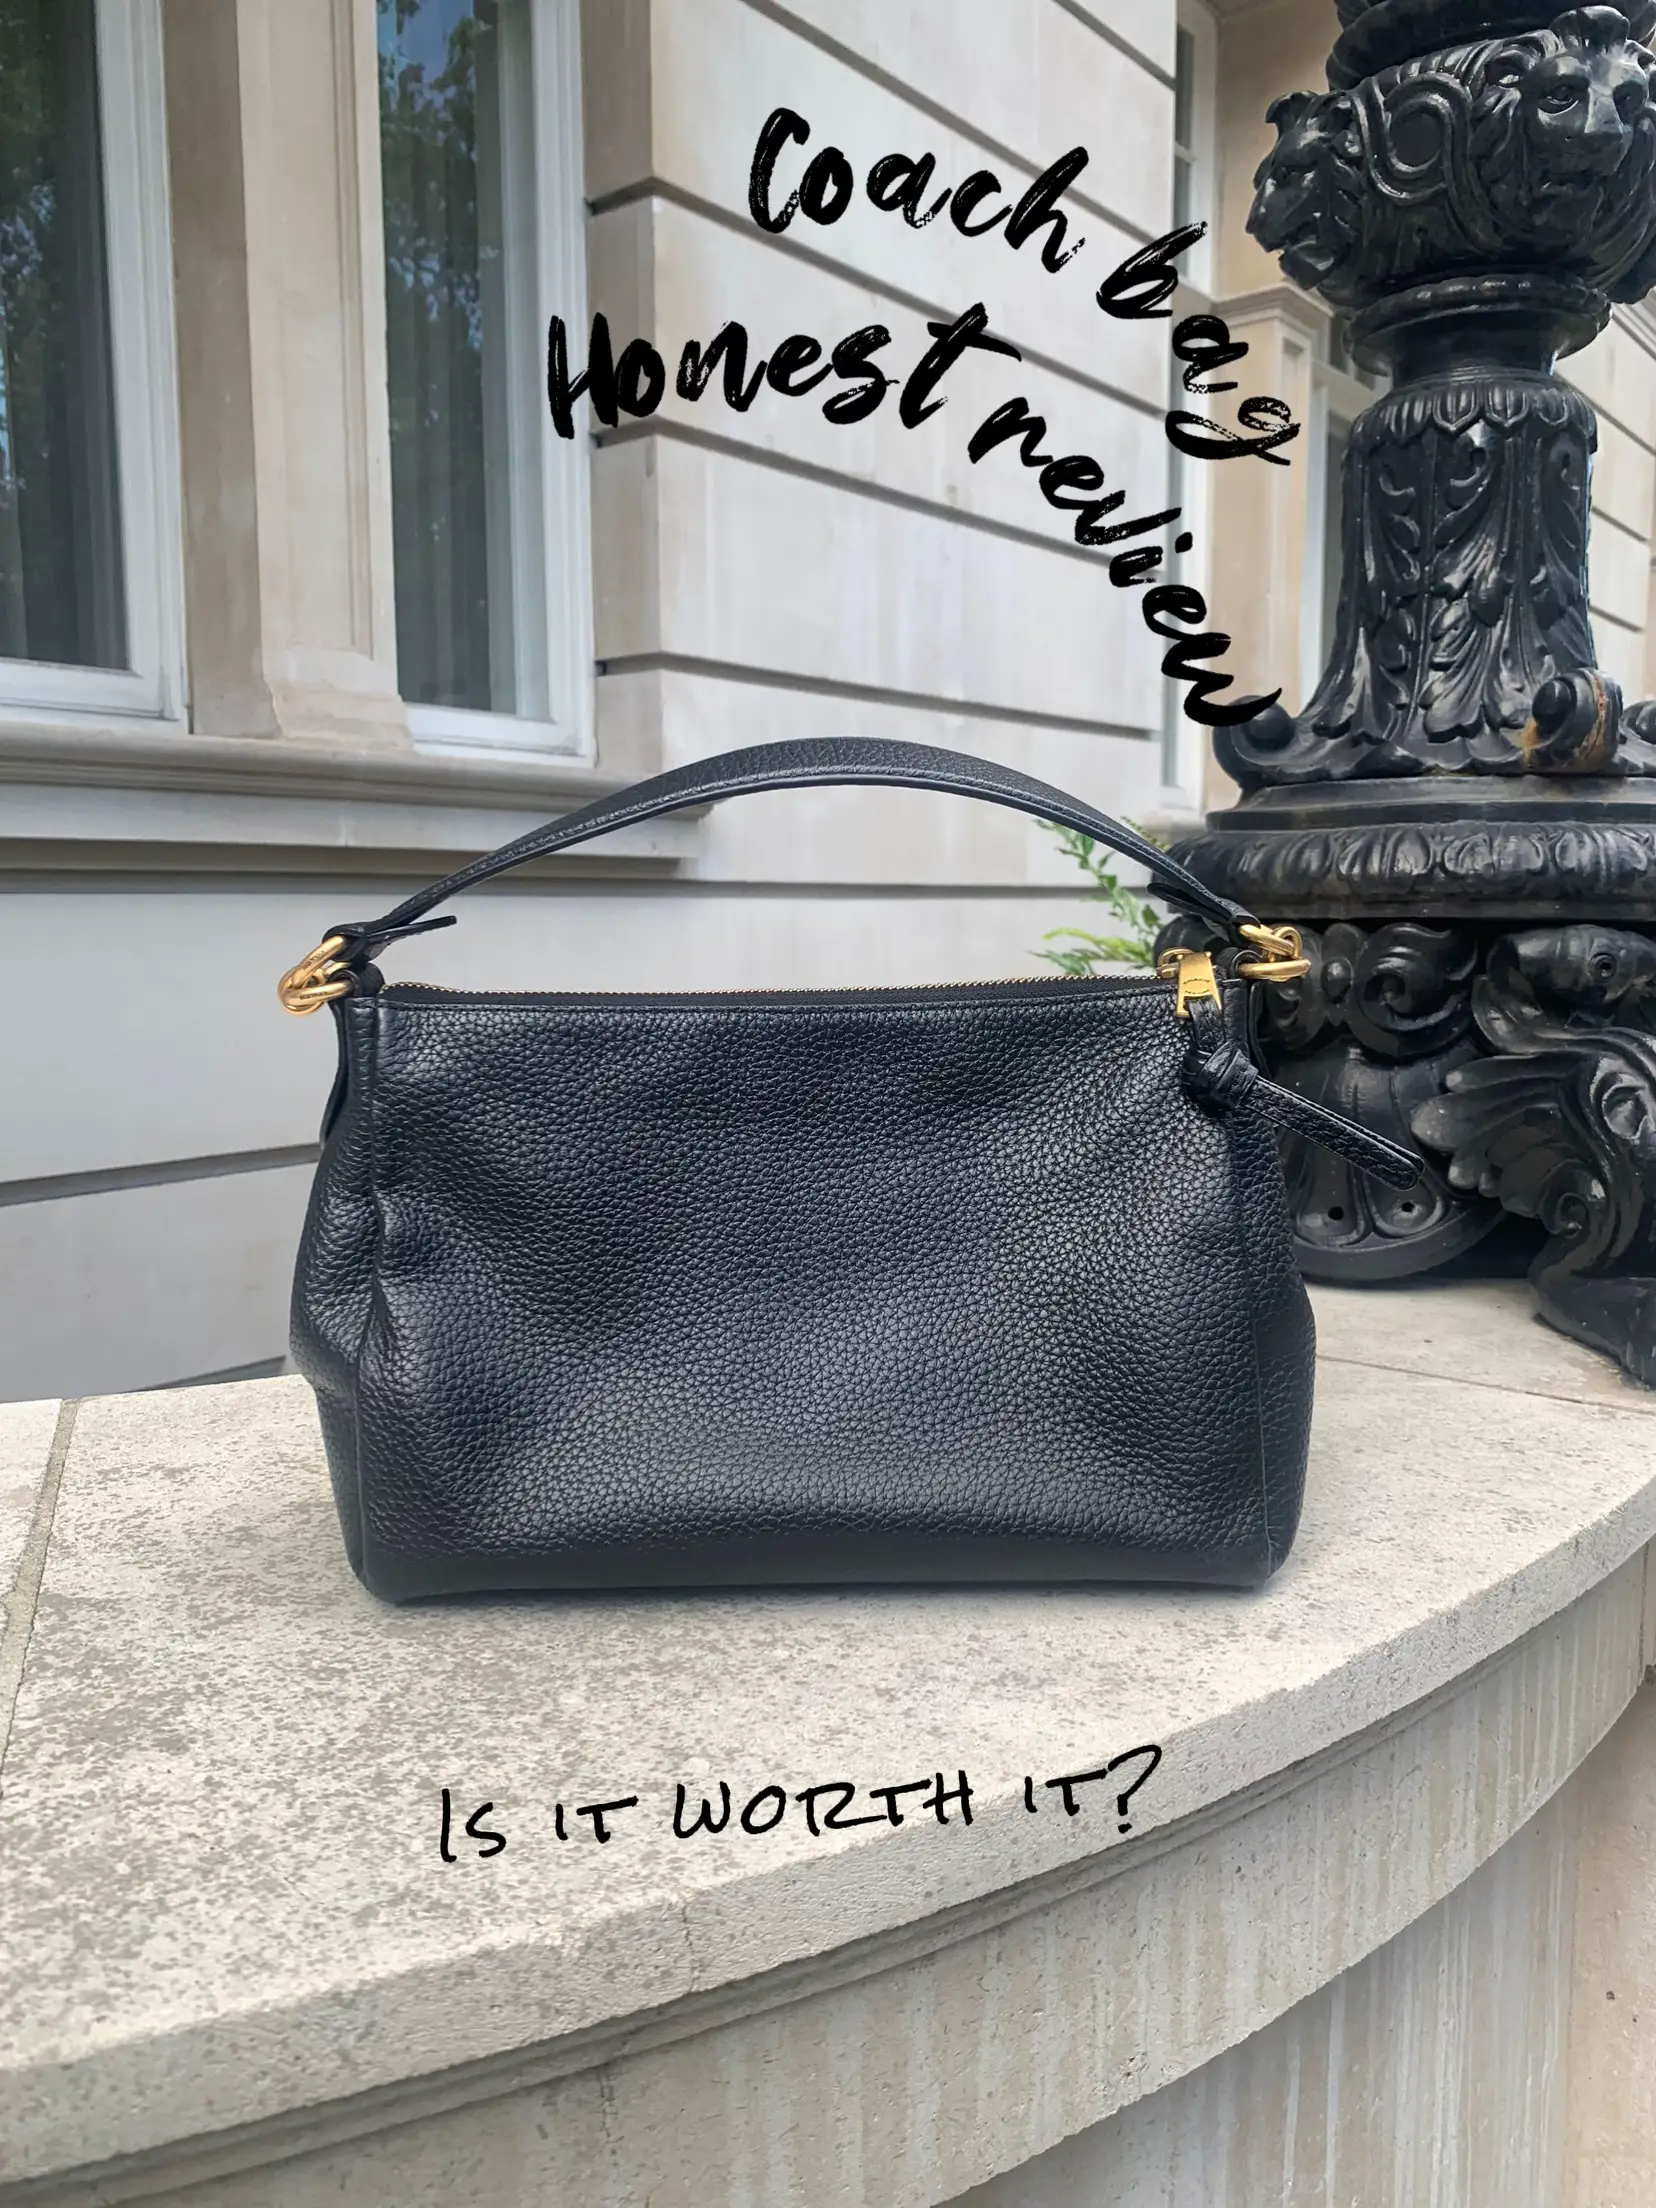 COACH Town Bucket Bag Unboxing + Fit Check 